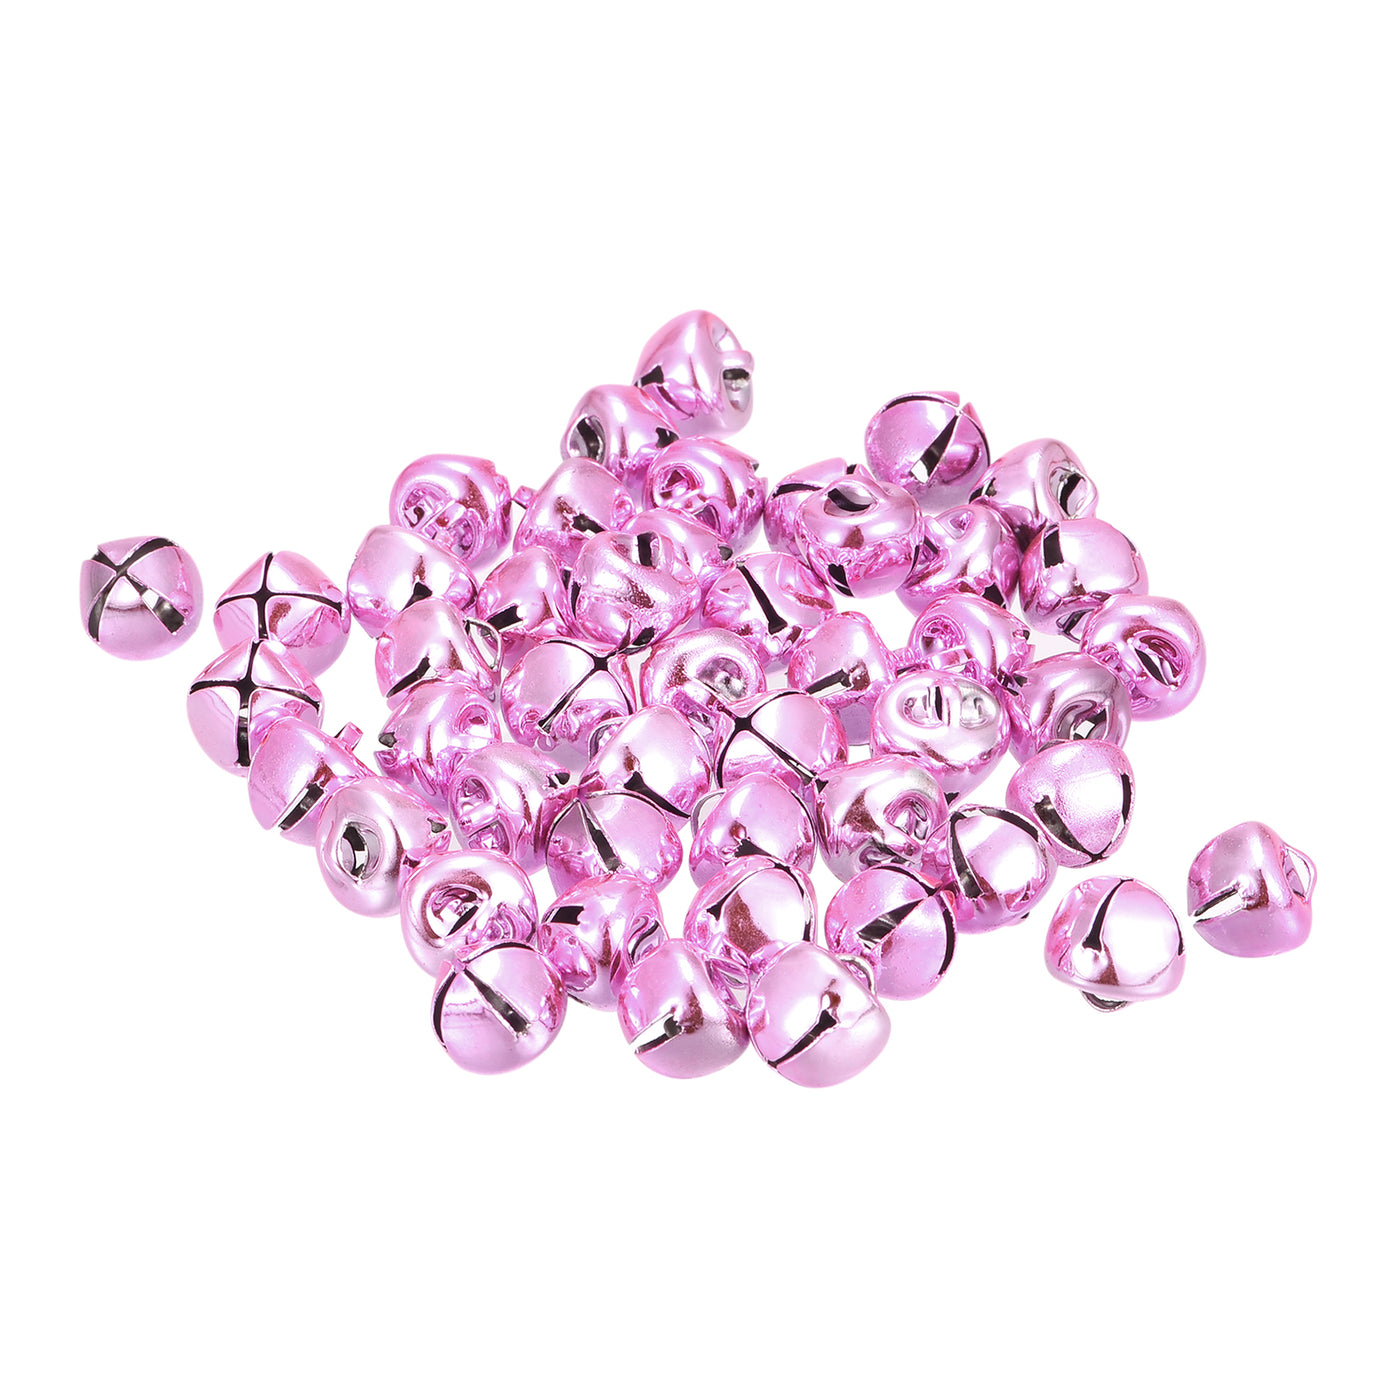 uxcell Uxcell Jingle Bells, 10mm 24pcs Small Bells for Crafts DIY Christmas, Pink